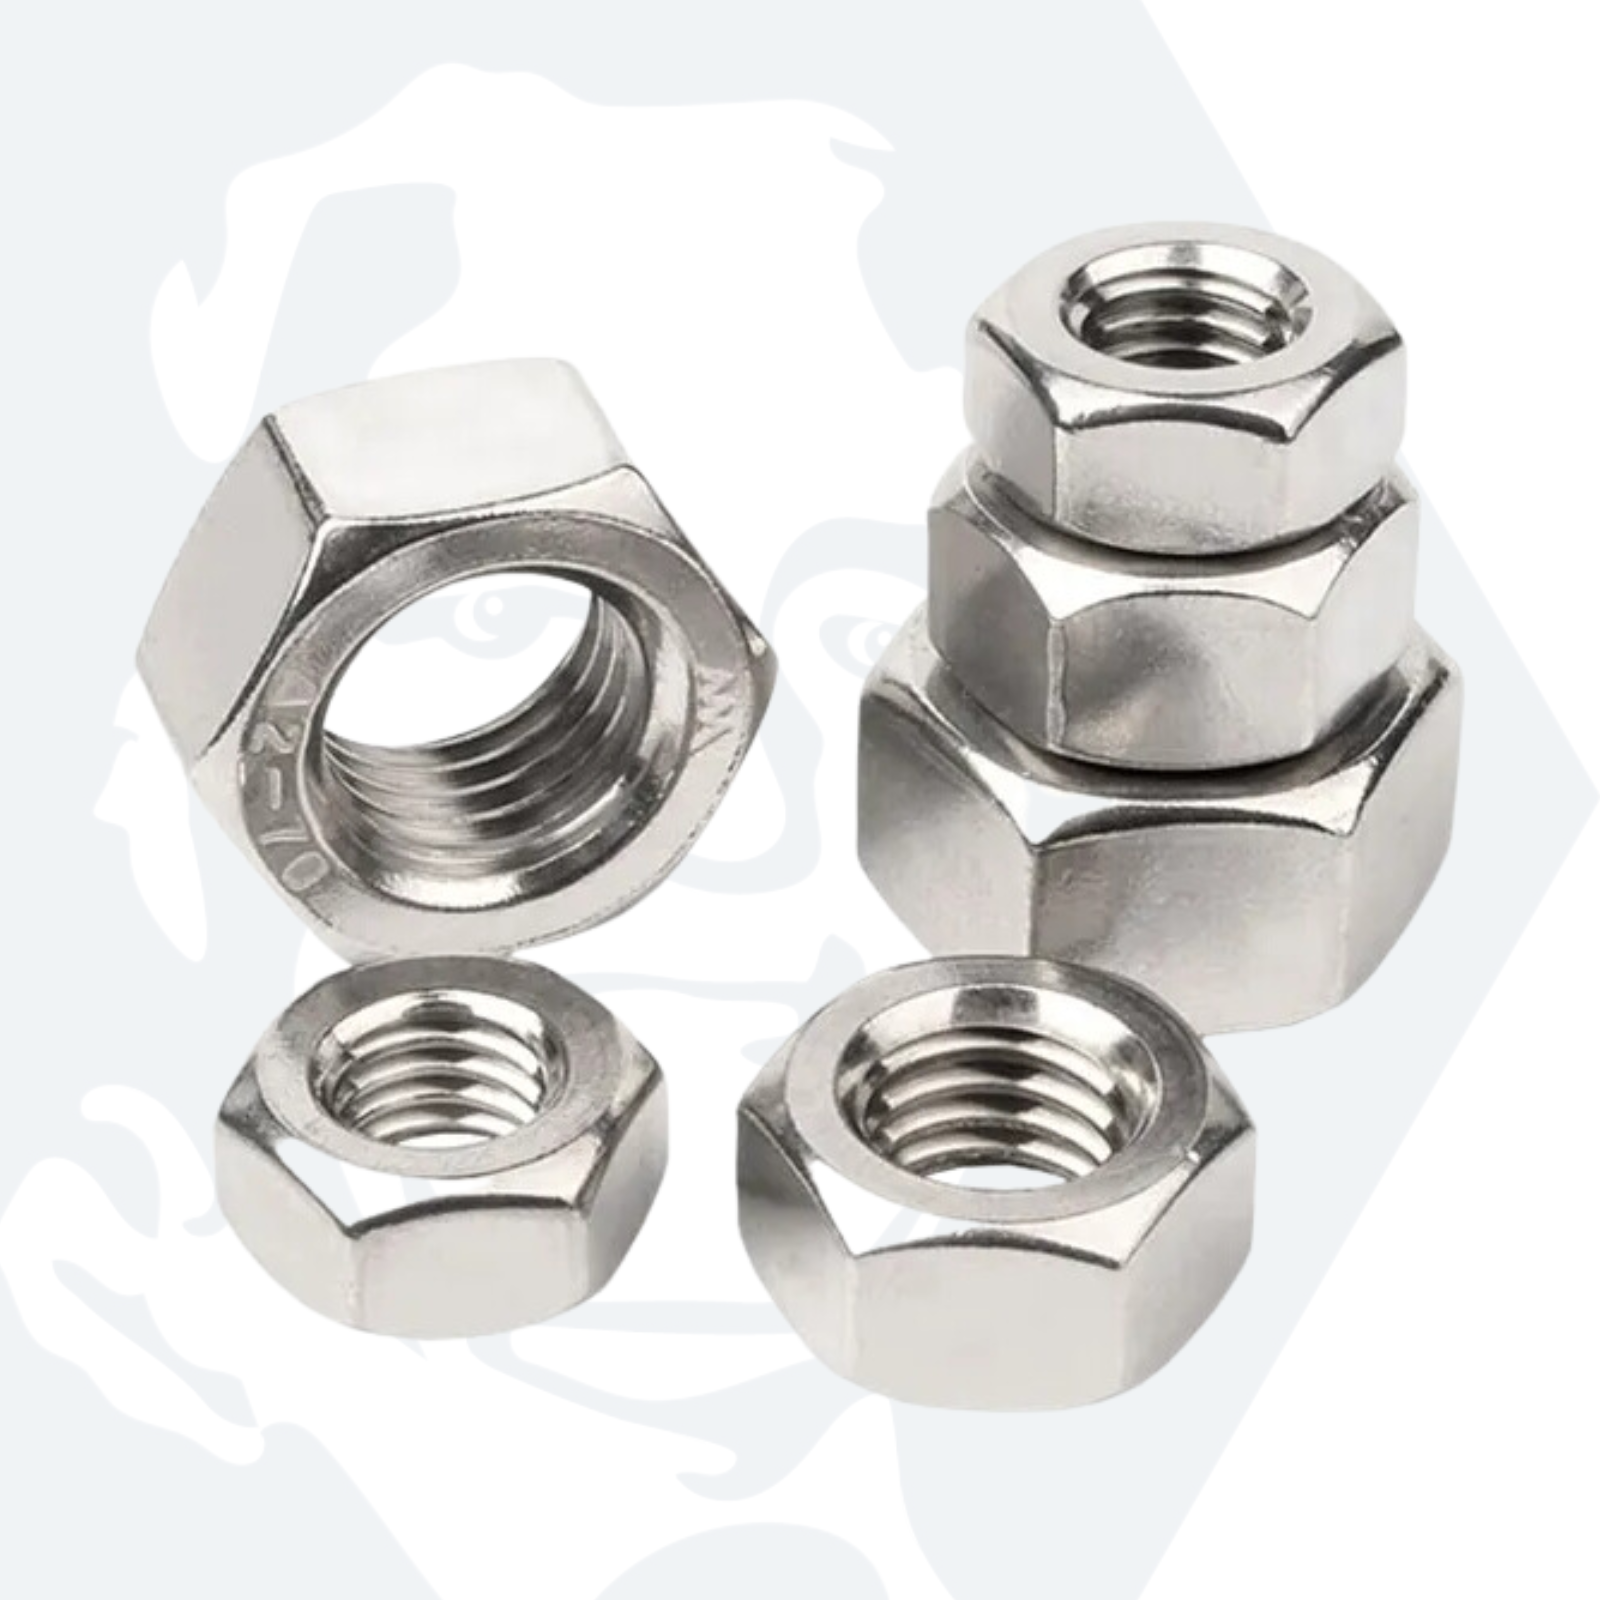 M7 Hexagon Nuts (DIN 934) - Stainless Steel (A2)